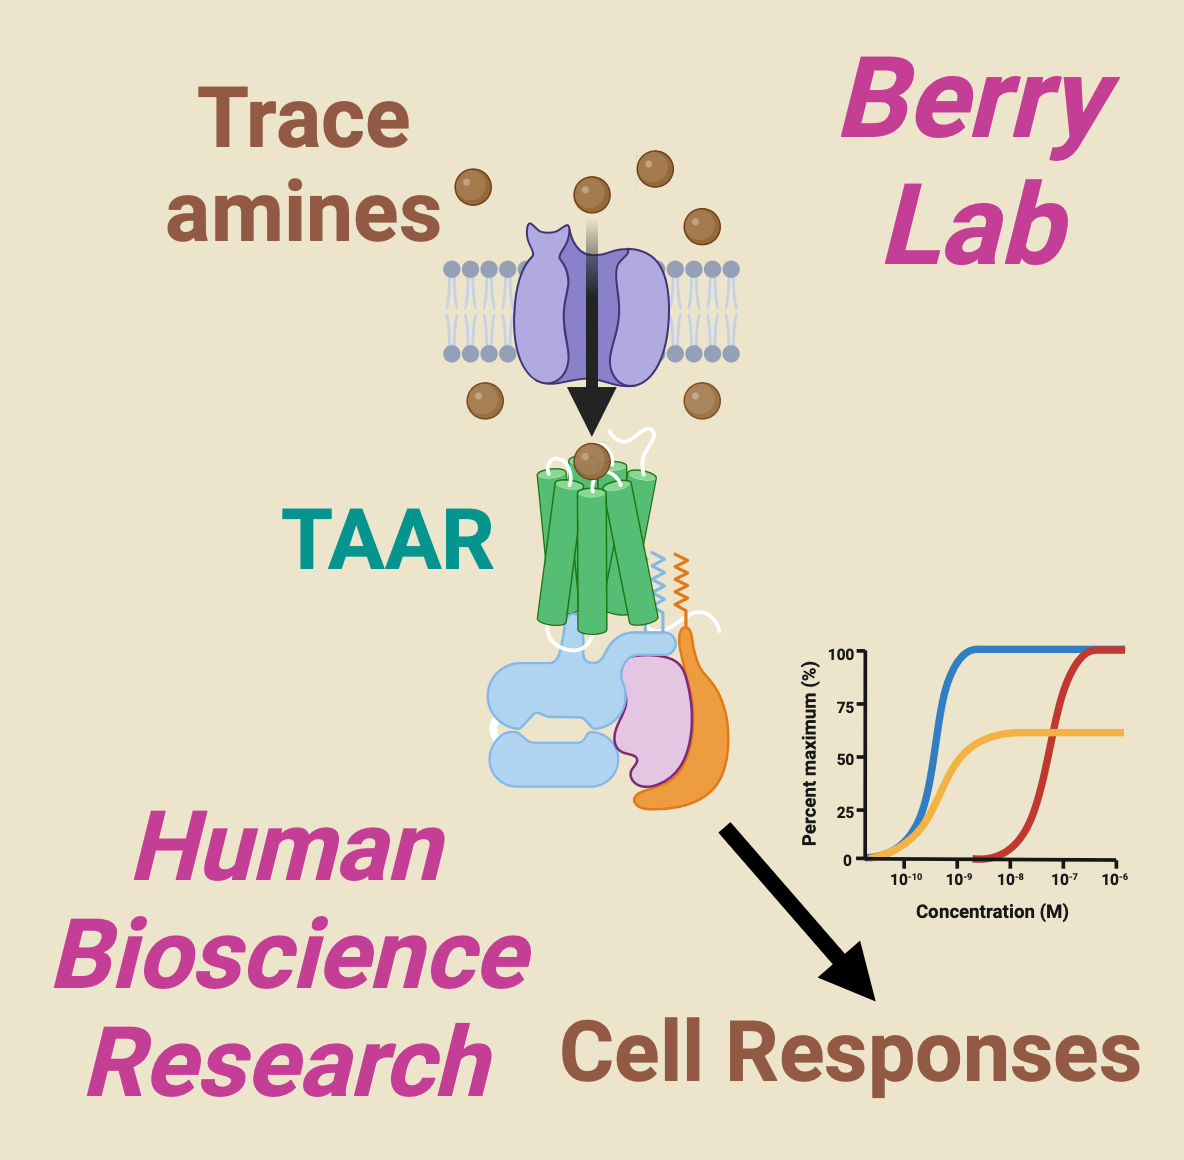 Cartoon depicting the Berry labs research focus on trace amines and their effects on cellular systems